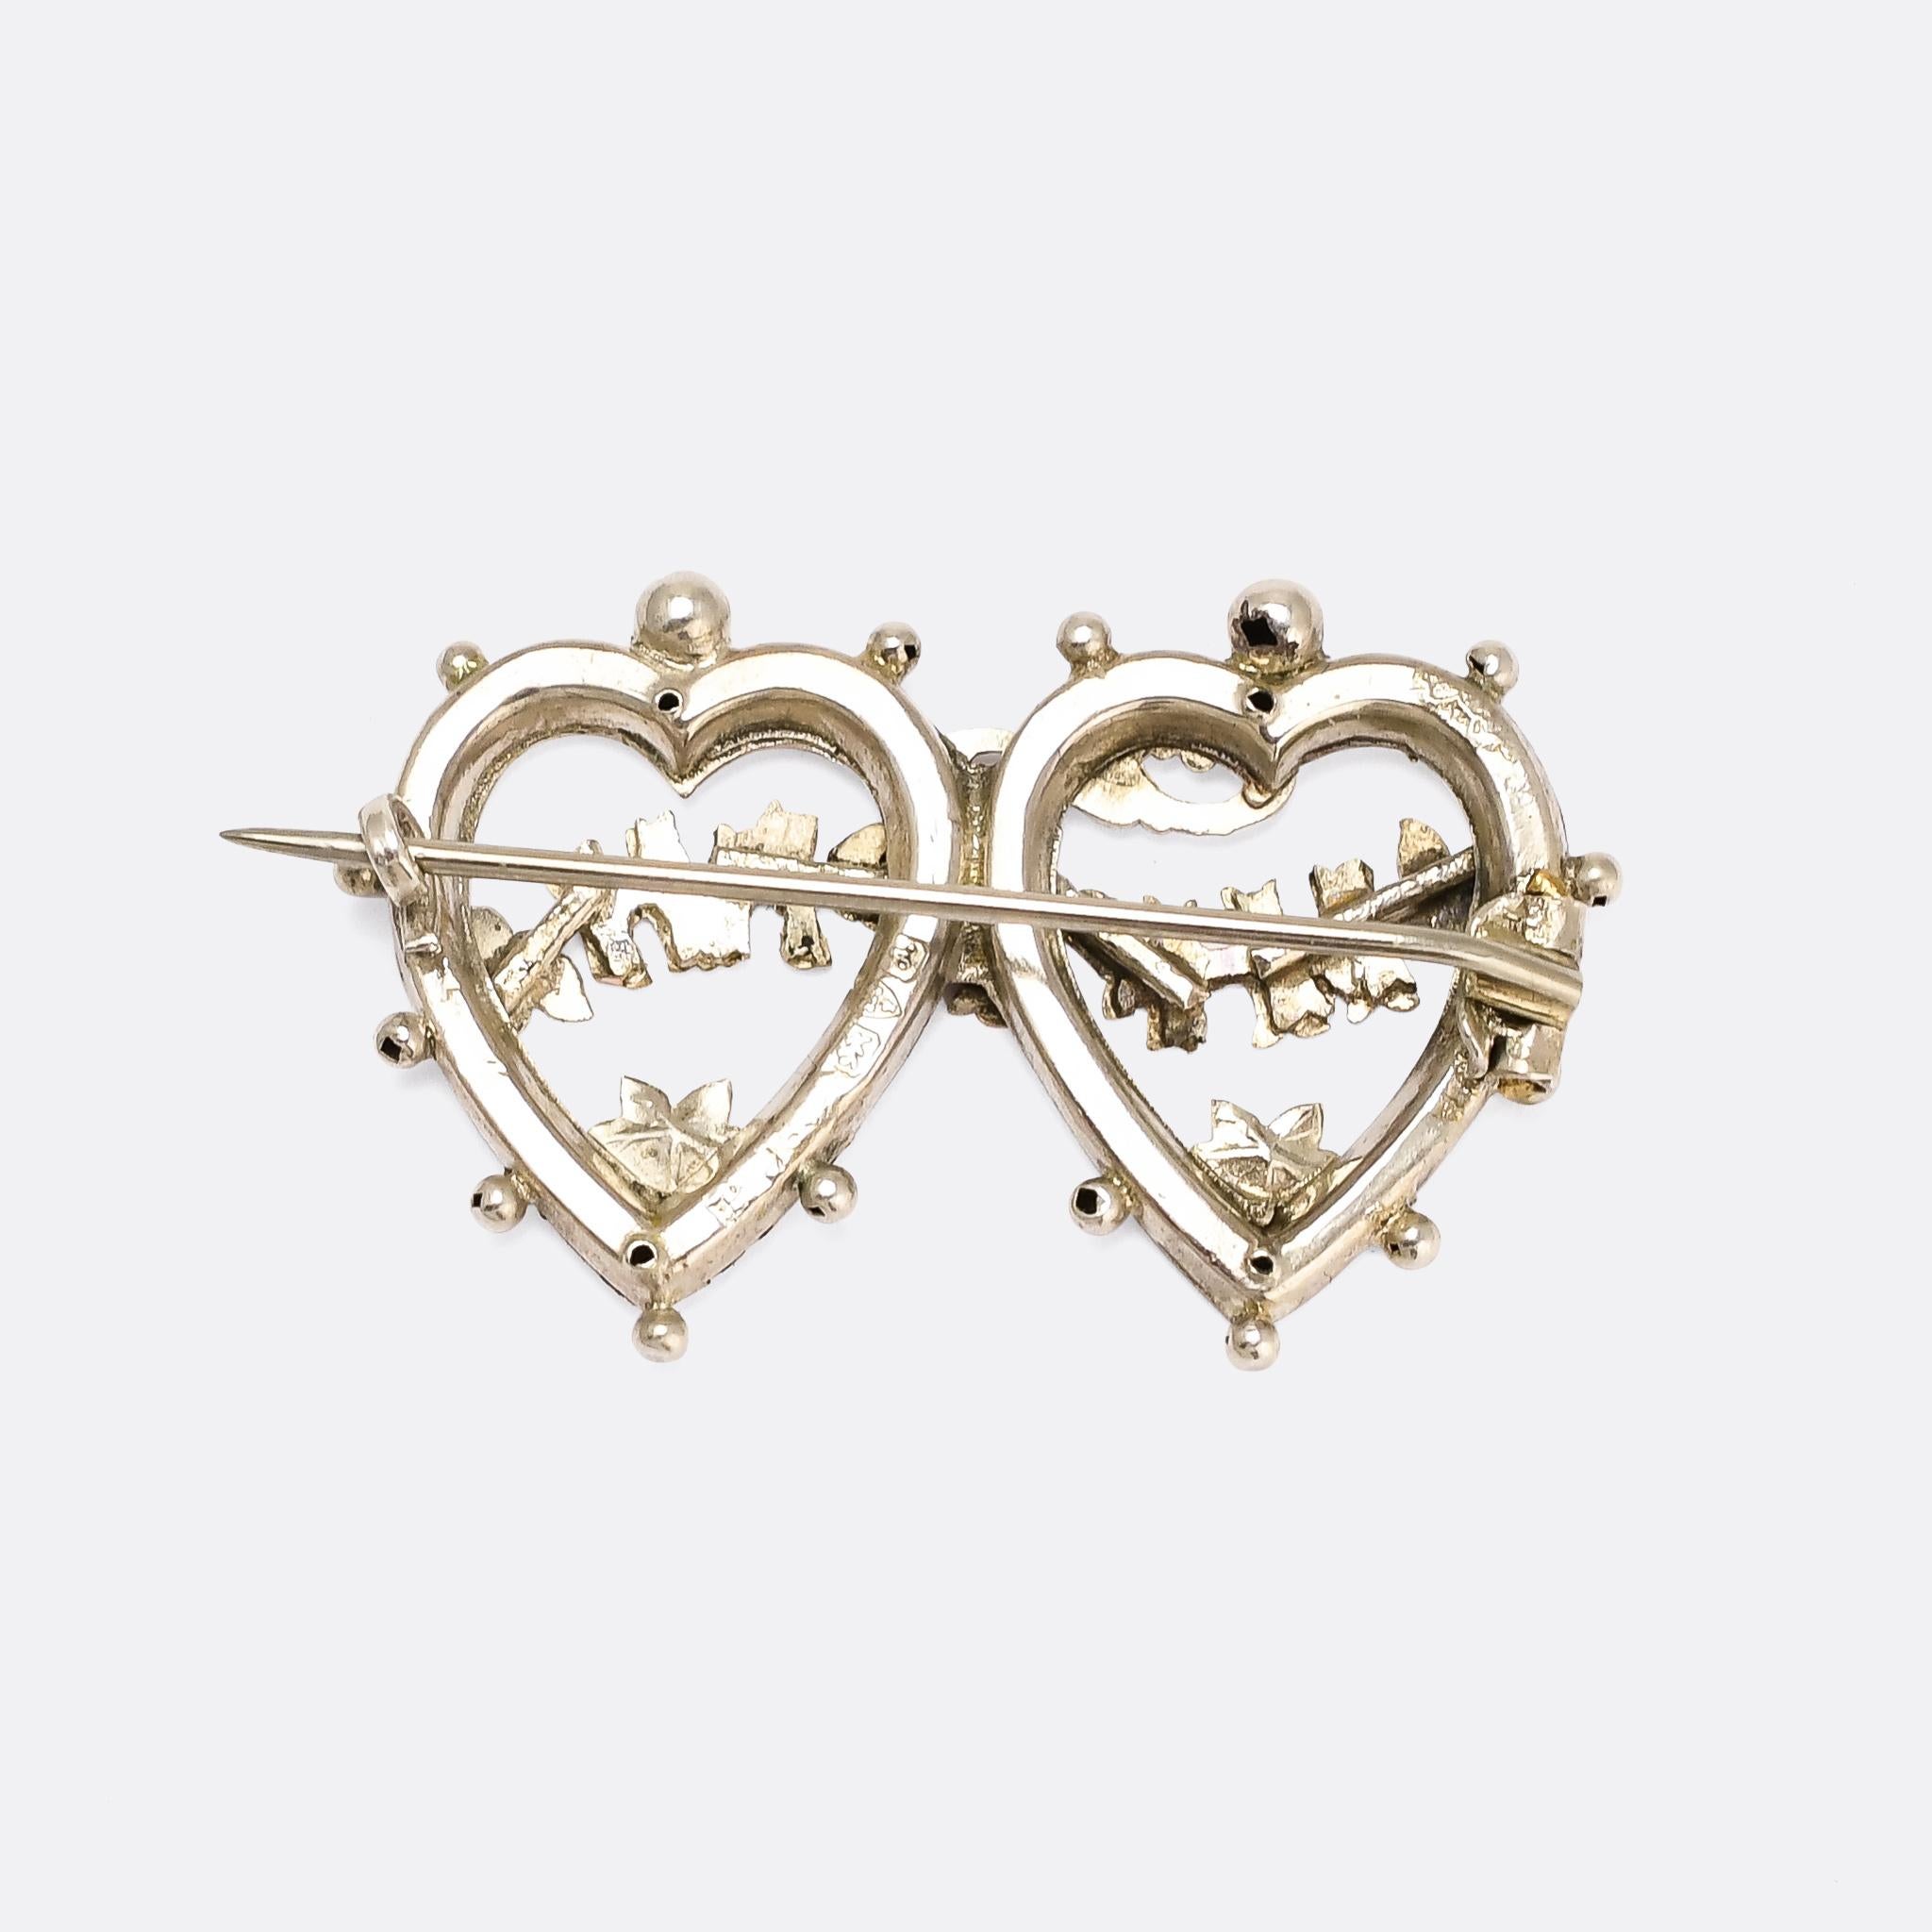 A fine quality antique double heart MIZPAH brooch dating from 1901. It's crafted in sterling silver, with applied rose and yellow gold letters, flowers, and ivy leaves.

Mizpah jewellery symbolises a bond between two estranged parties, with God as